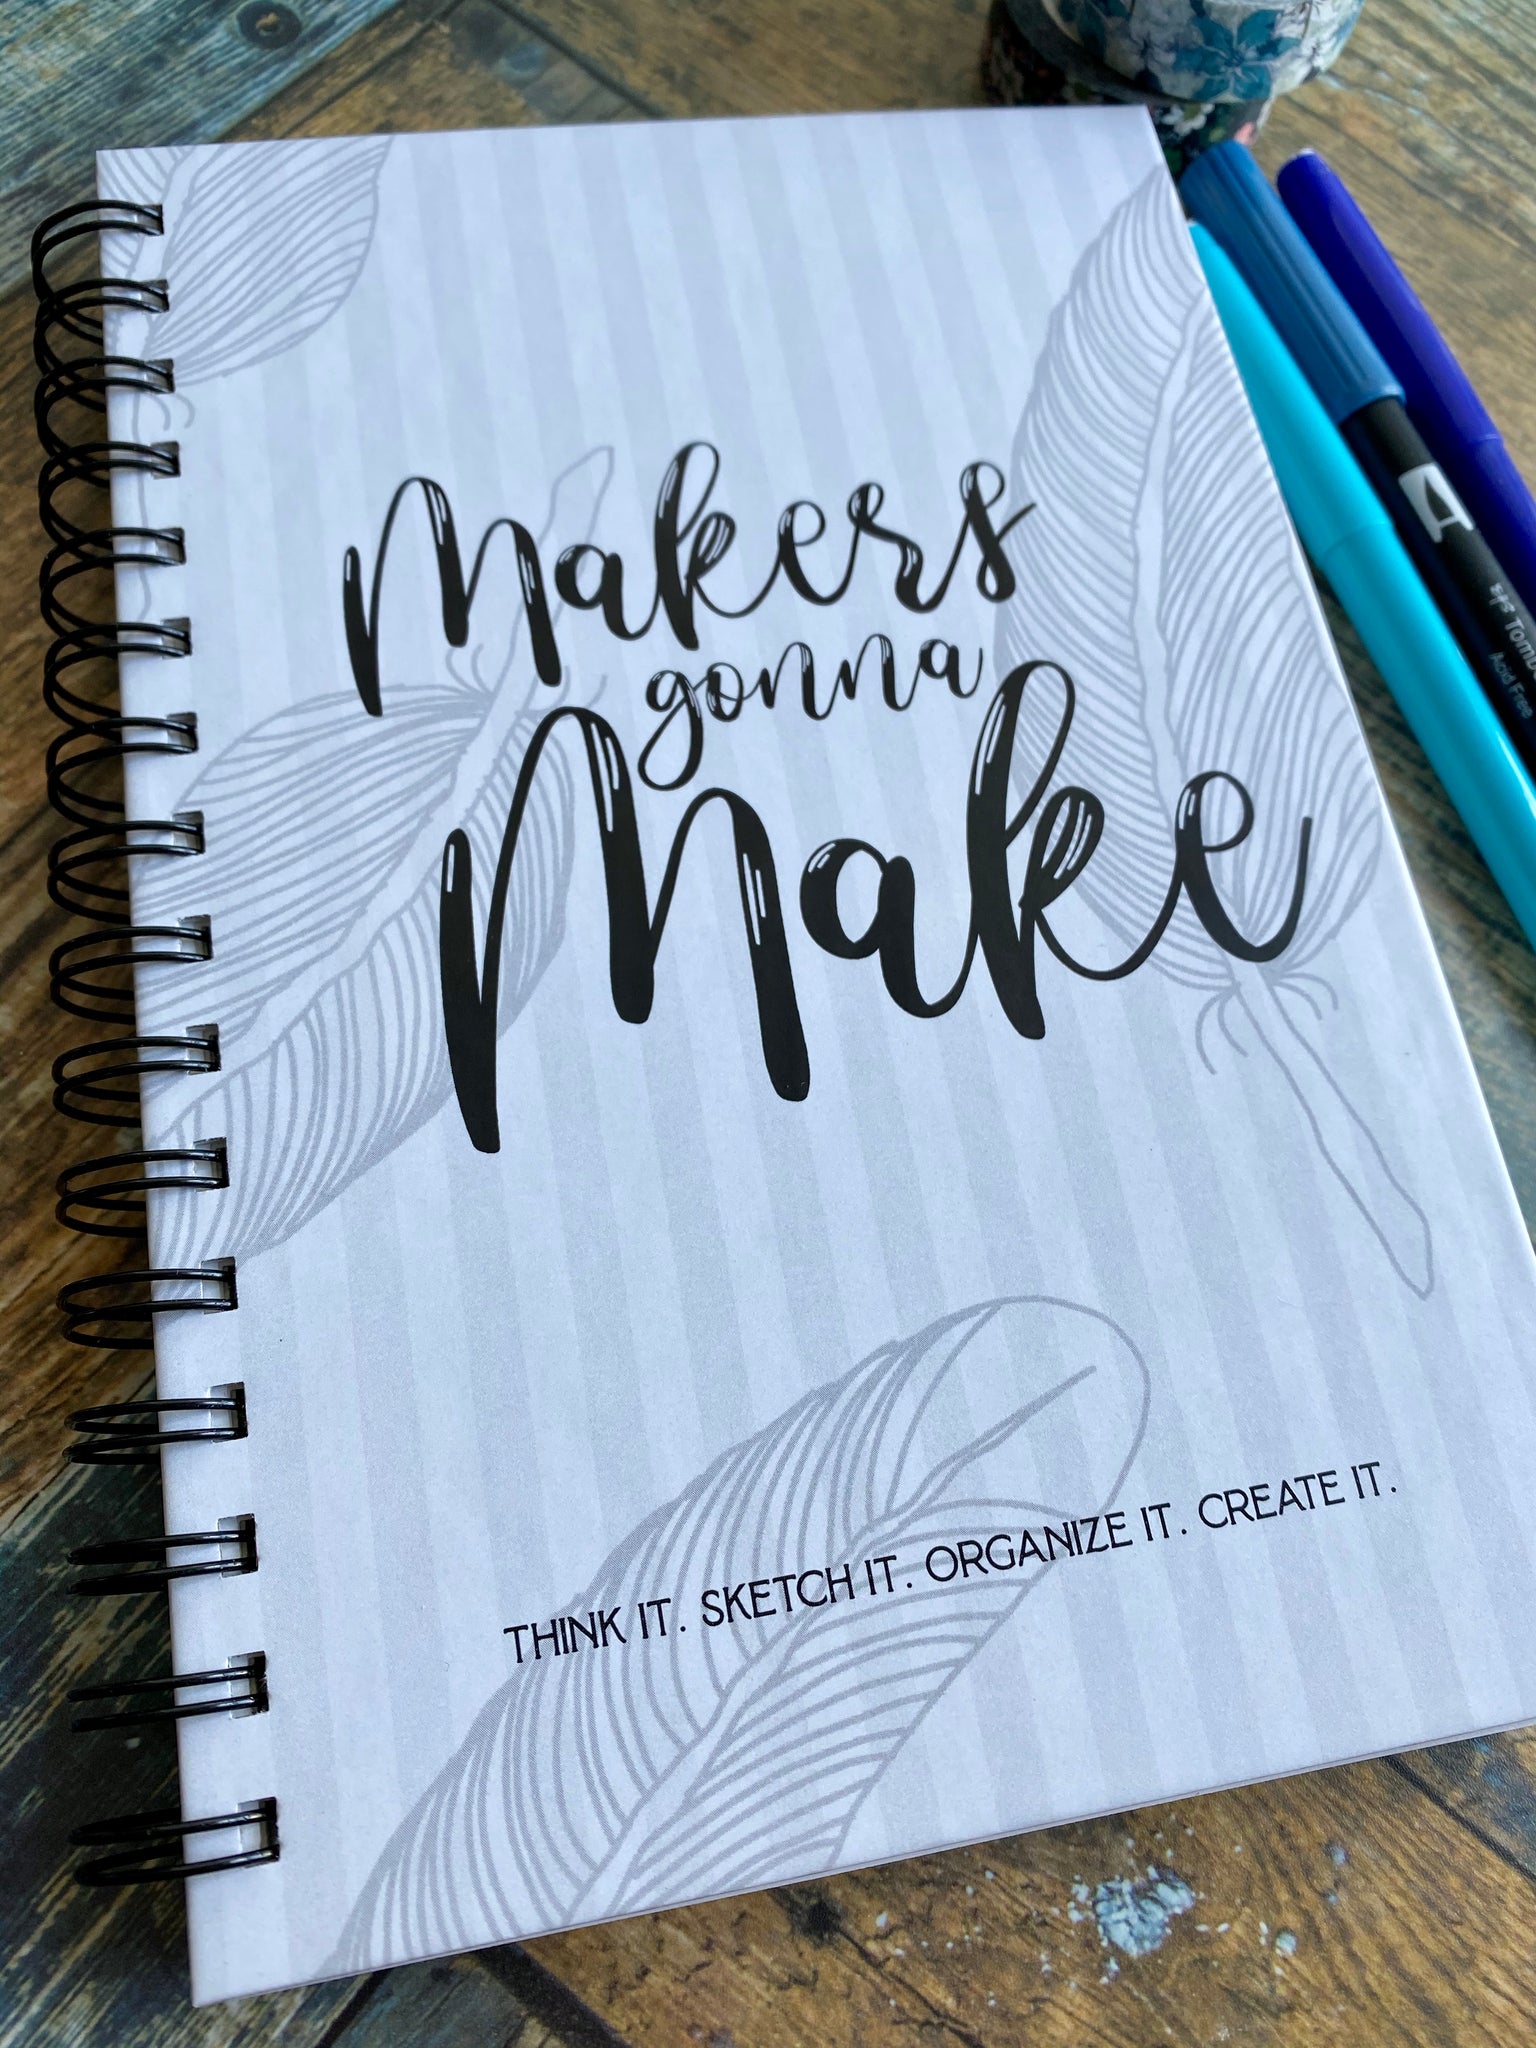 Makers Gonna Make - Custom Journal with monthly planner & Idea Sketches